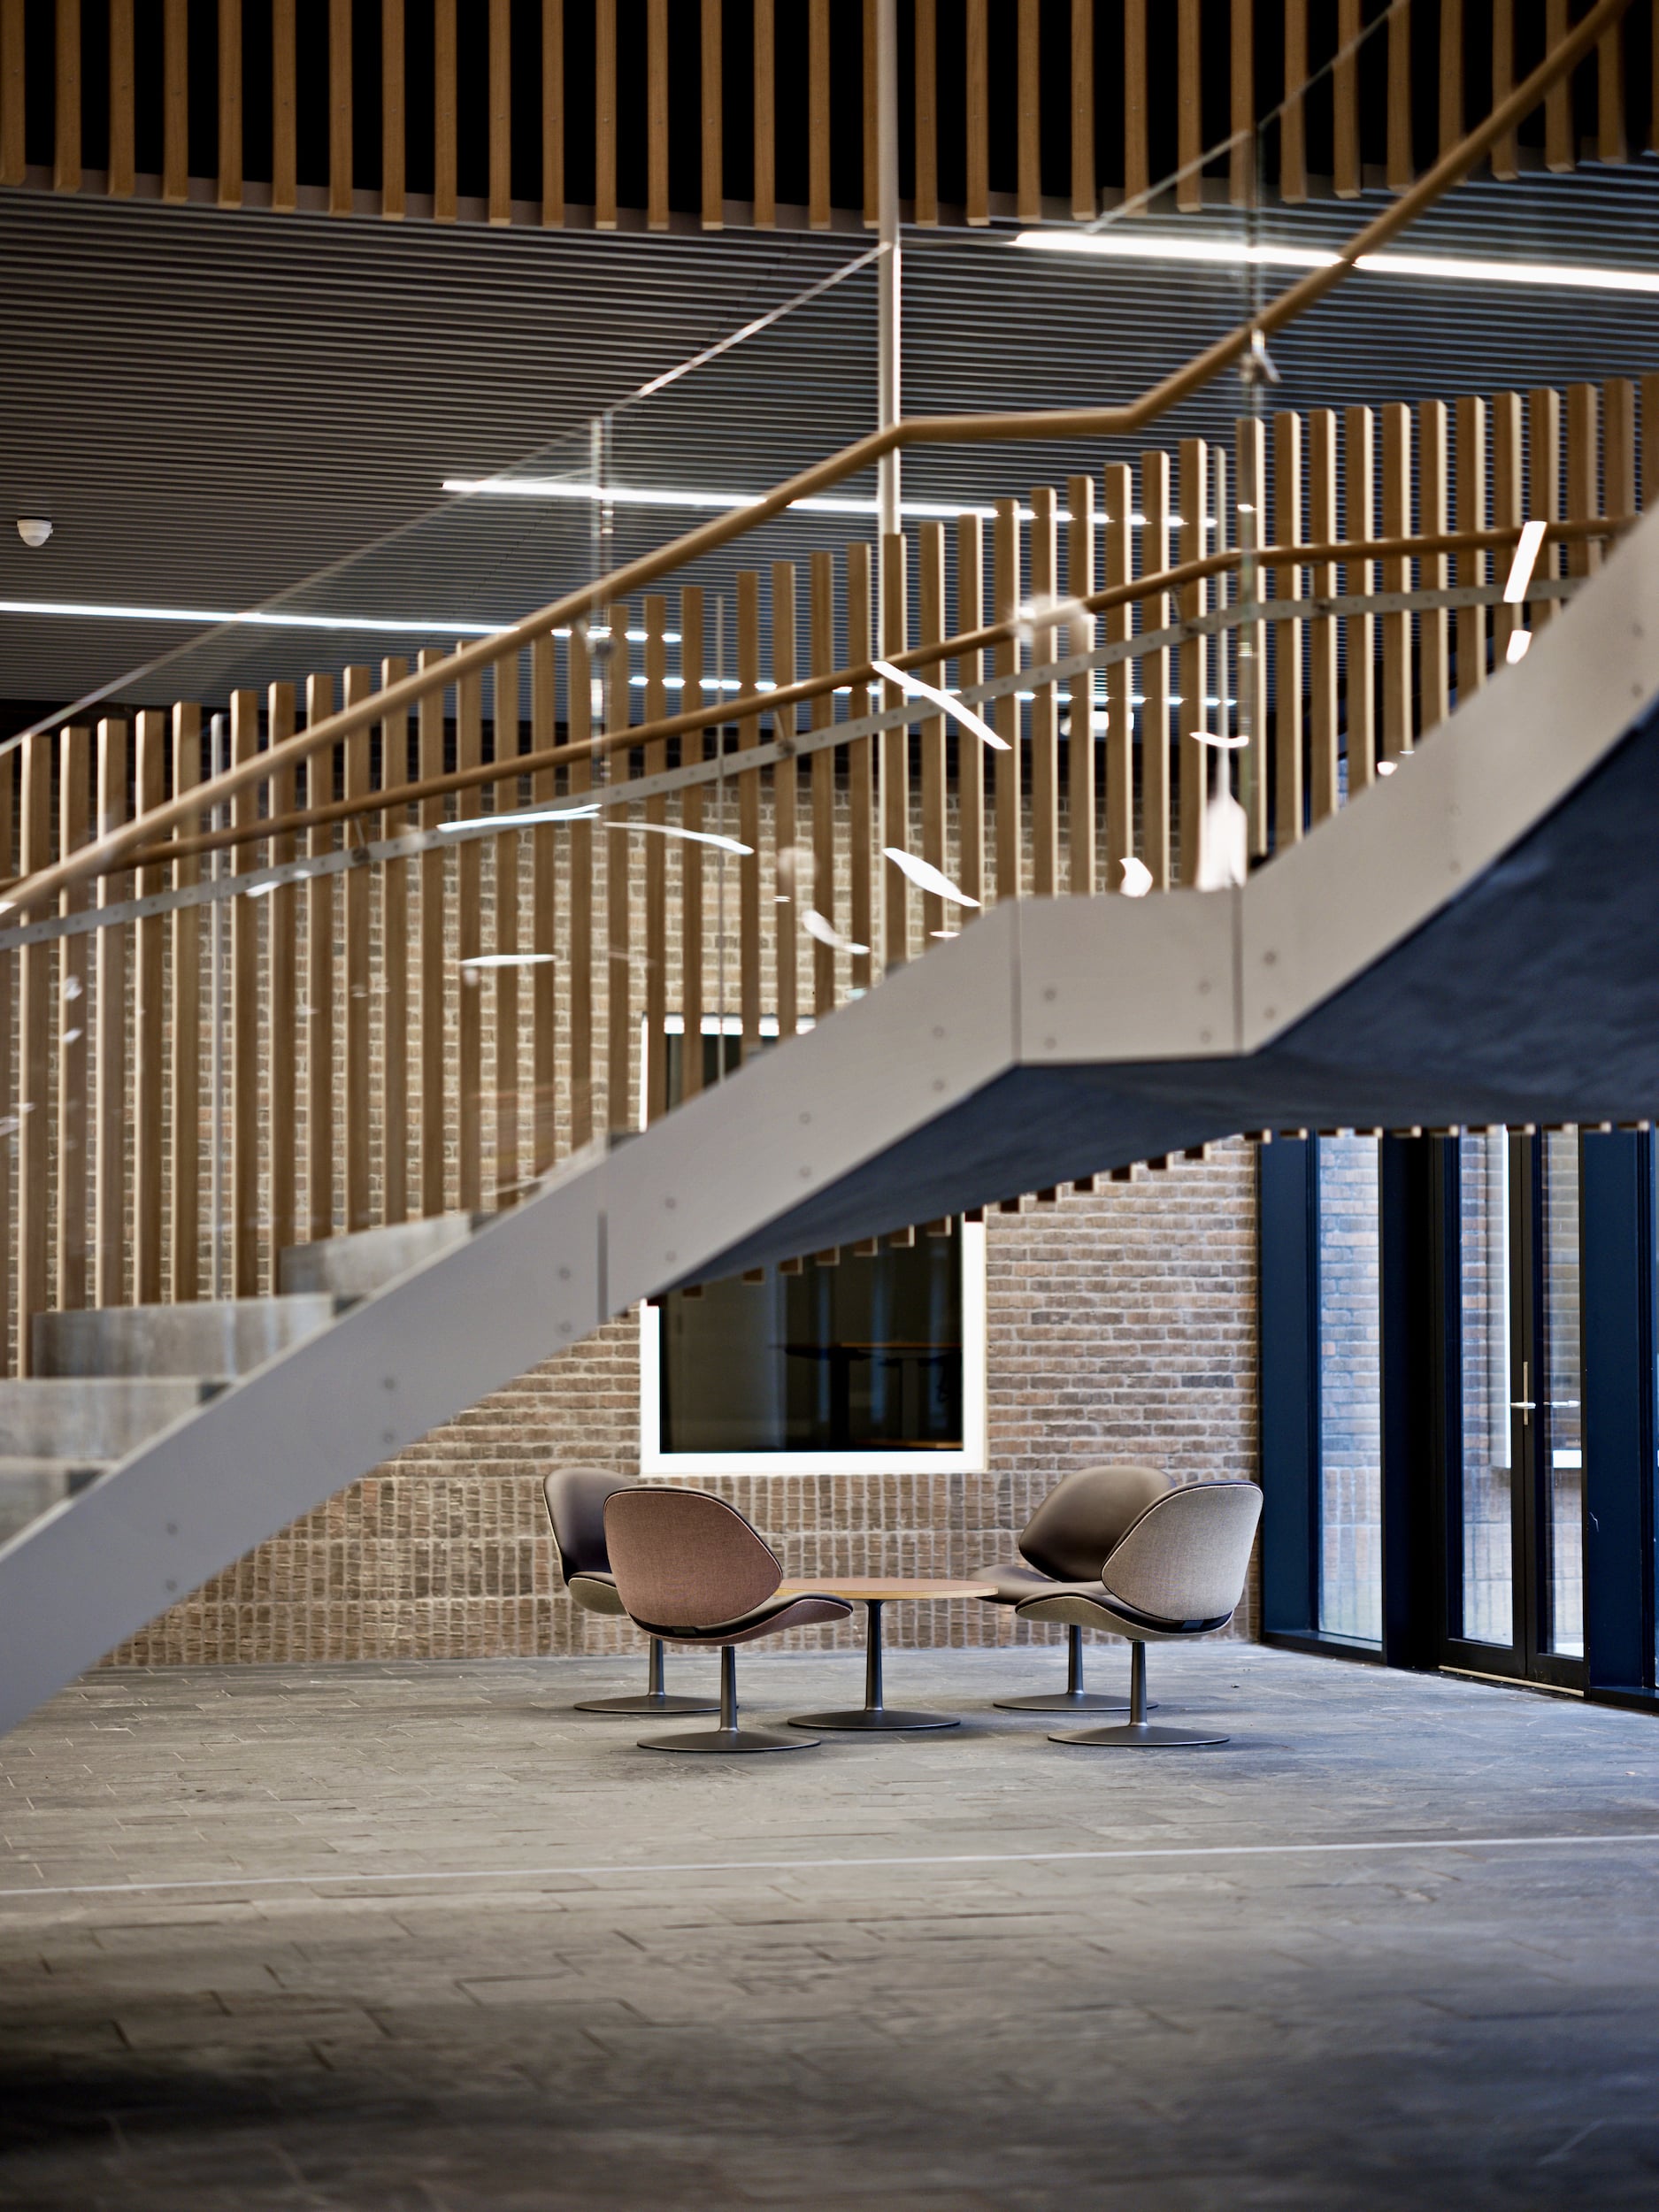 Salto & Sigsgaard’s World Renowned Council Chair is Refined for New Hospital